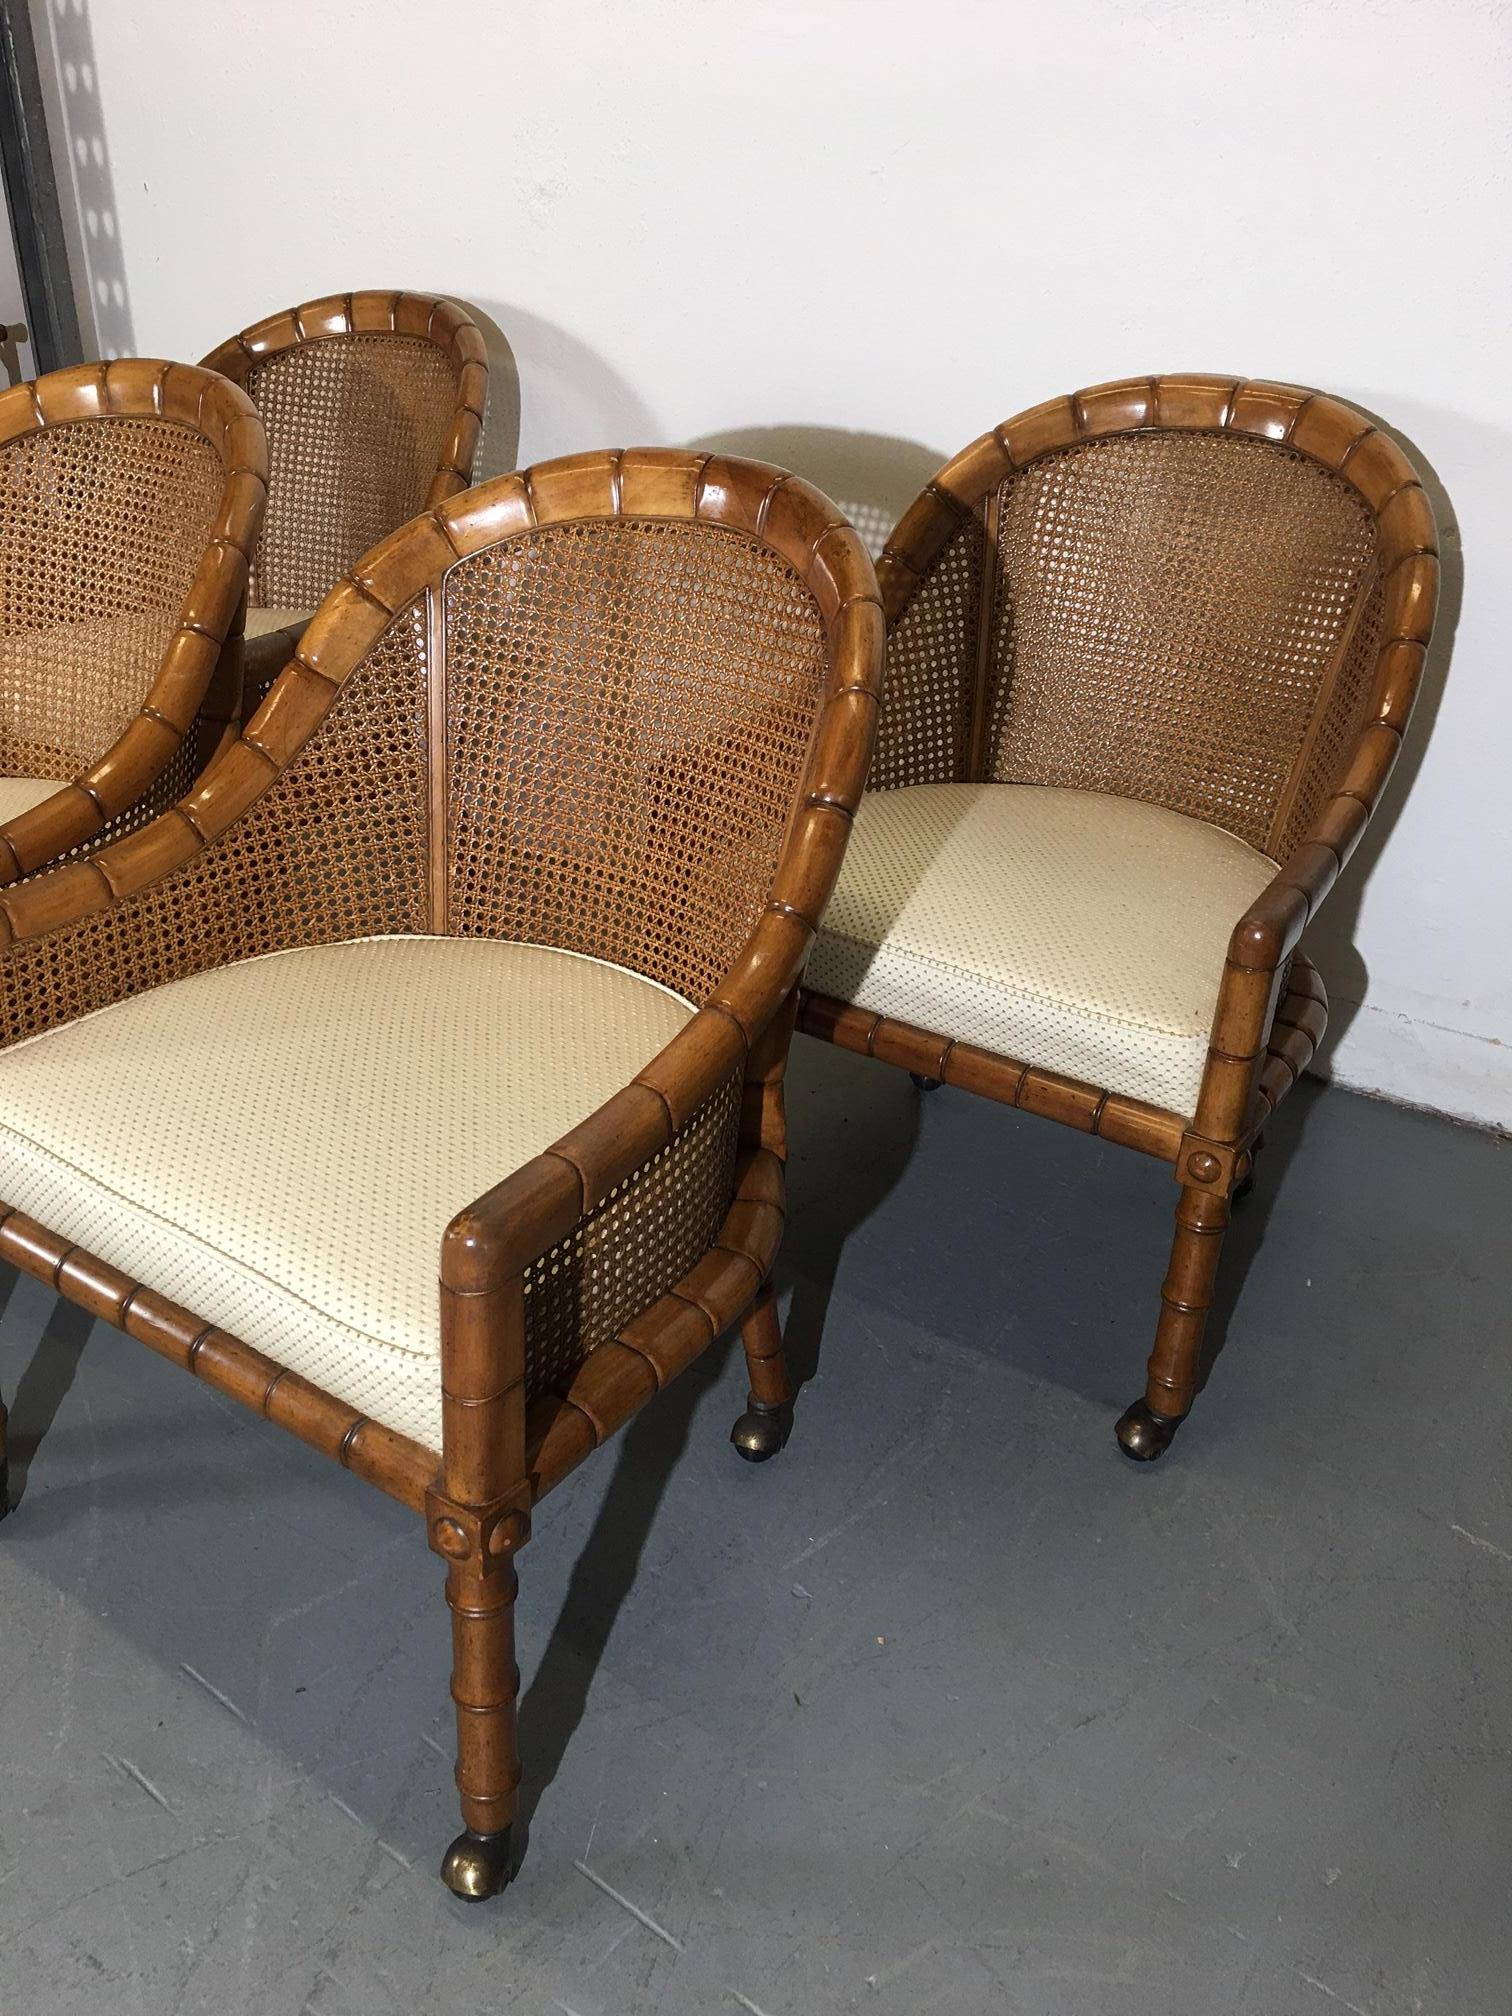 Set of four faux-bamboo-style cane back accent chairs. Original patinated copper-covered casters. Can work as head chairs at the dining table to lounge chairs in the living room.